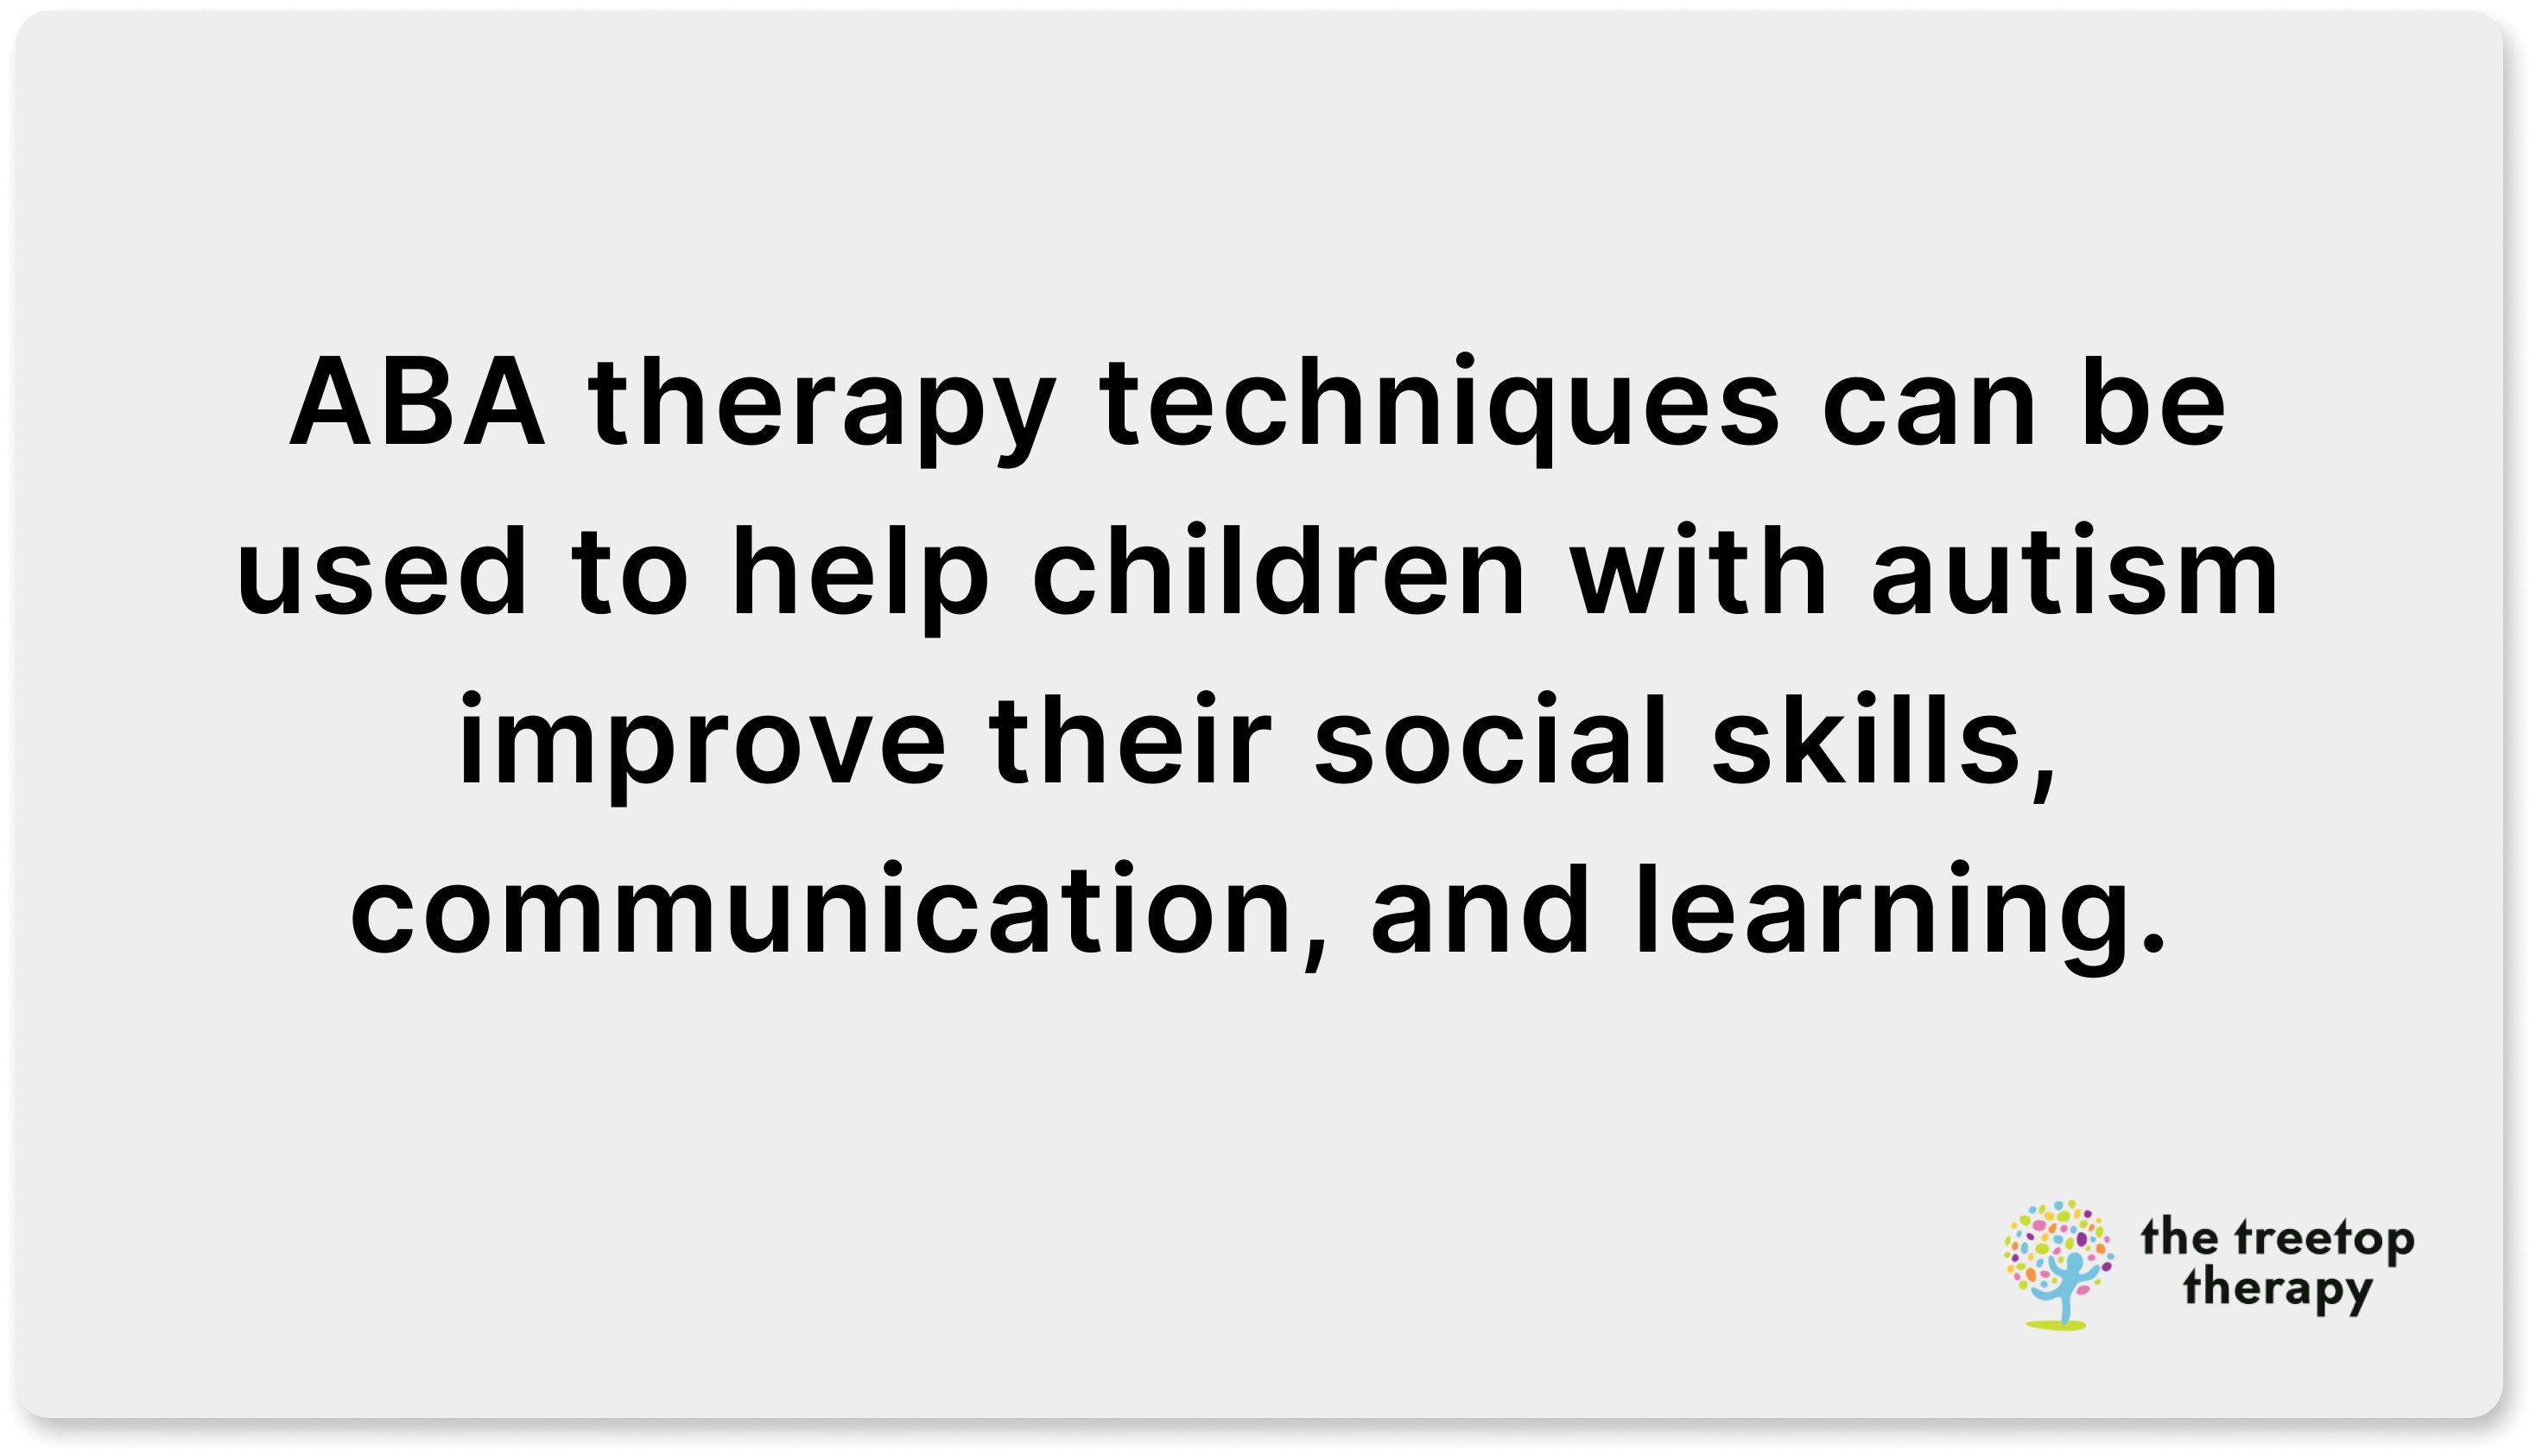 benefits of aba therapy techniques